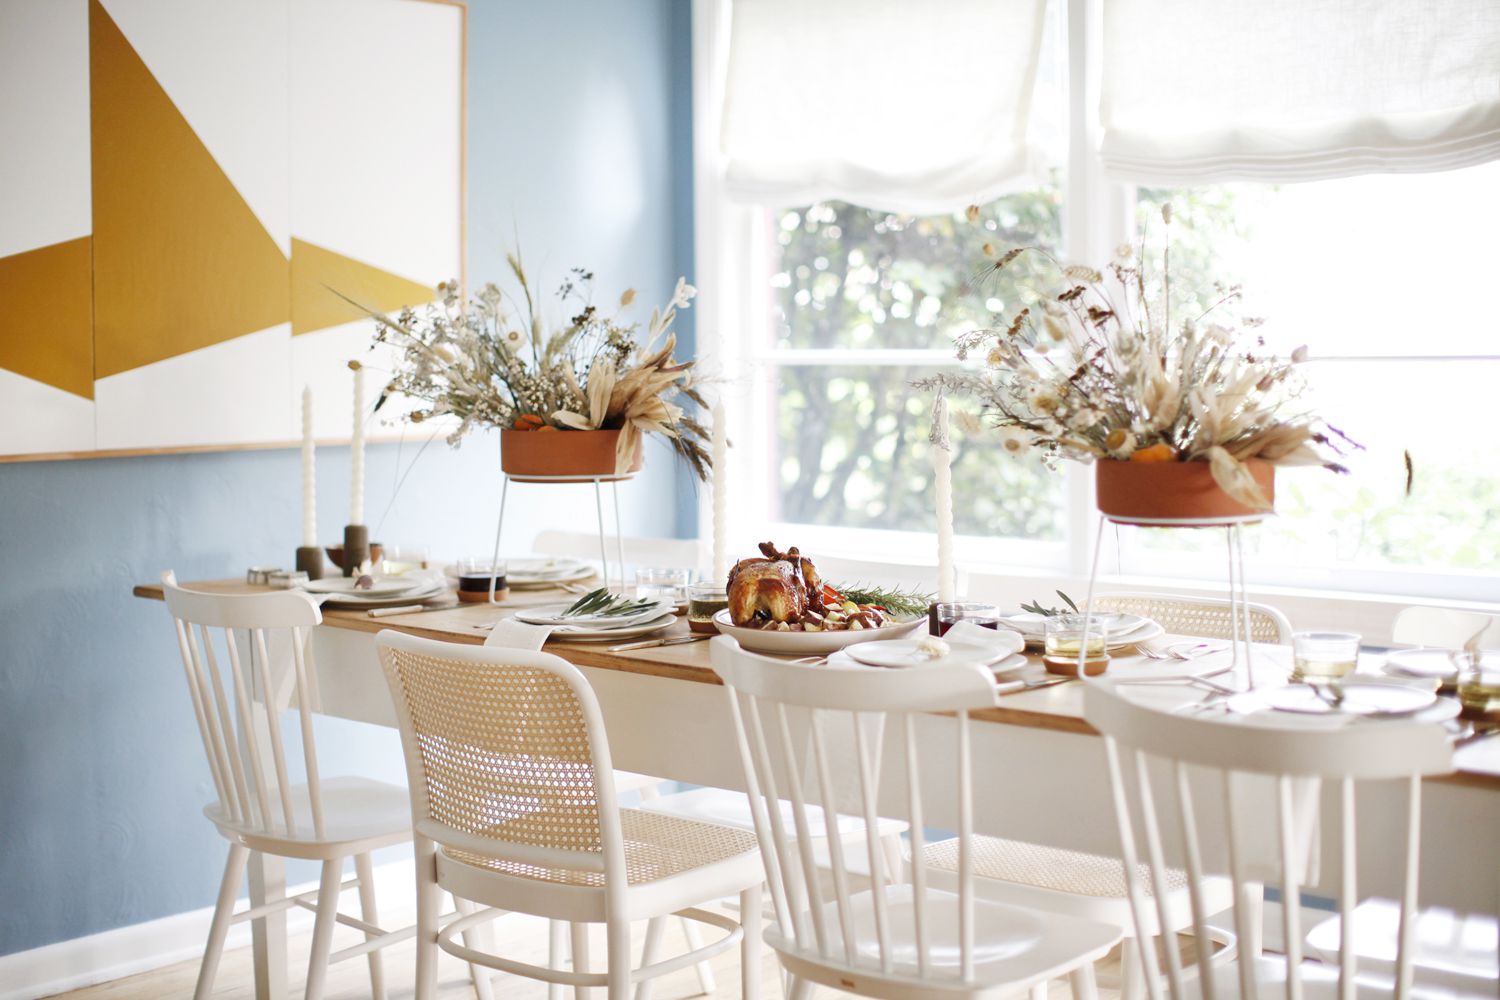 55 Thanksgiving Decorating Ideas for Around Your Home